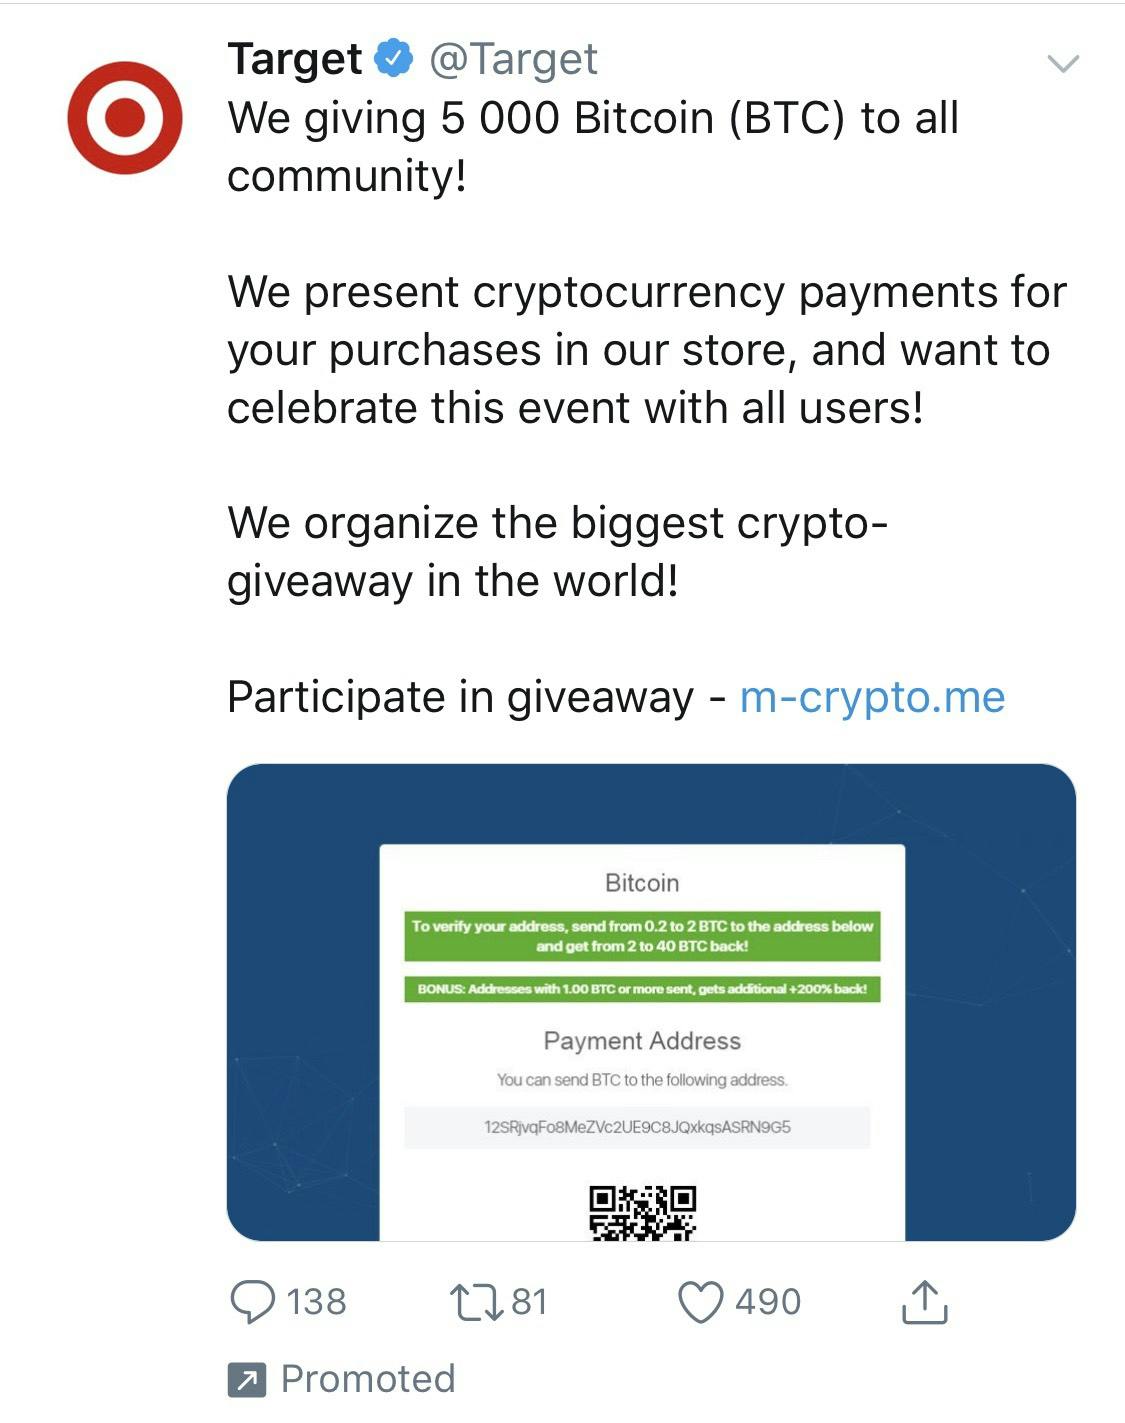 A Bitcoin scammer accessed Target's Twitter account this morning.